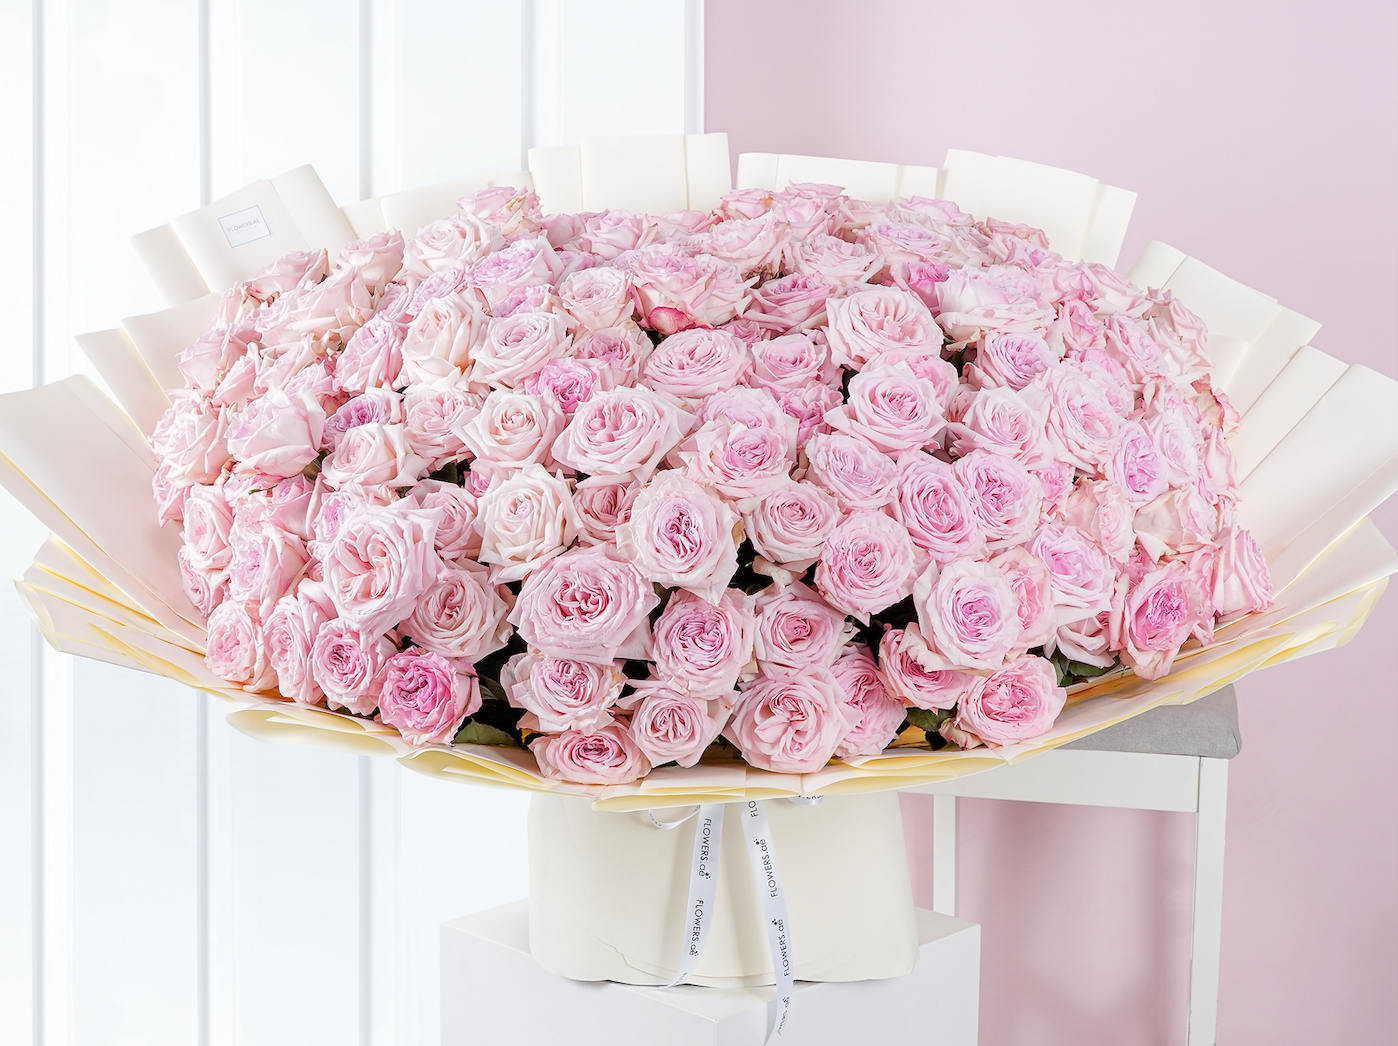 Introducing the Most Exclusive O'Hara Roses in White and Pink - Only at FLOWERS.AE